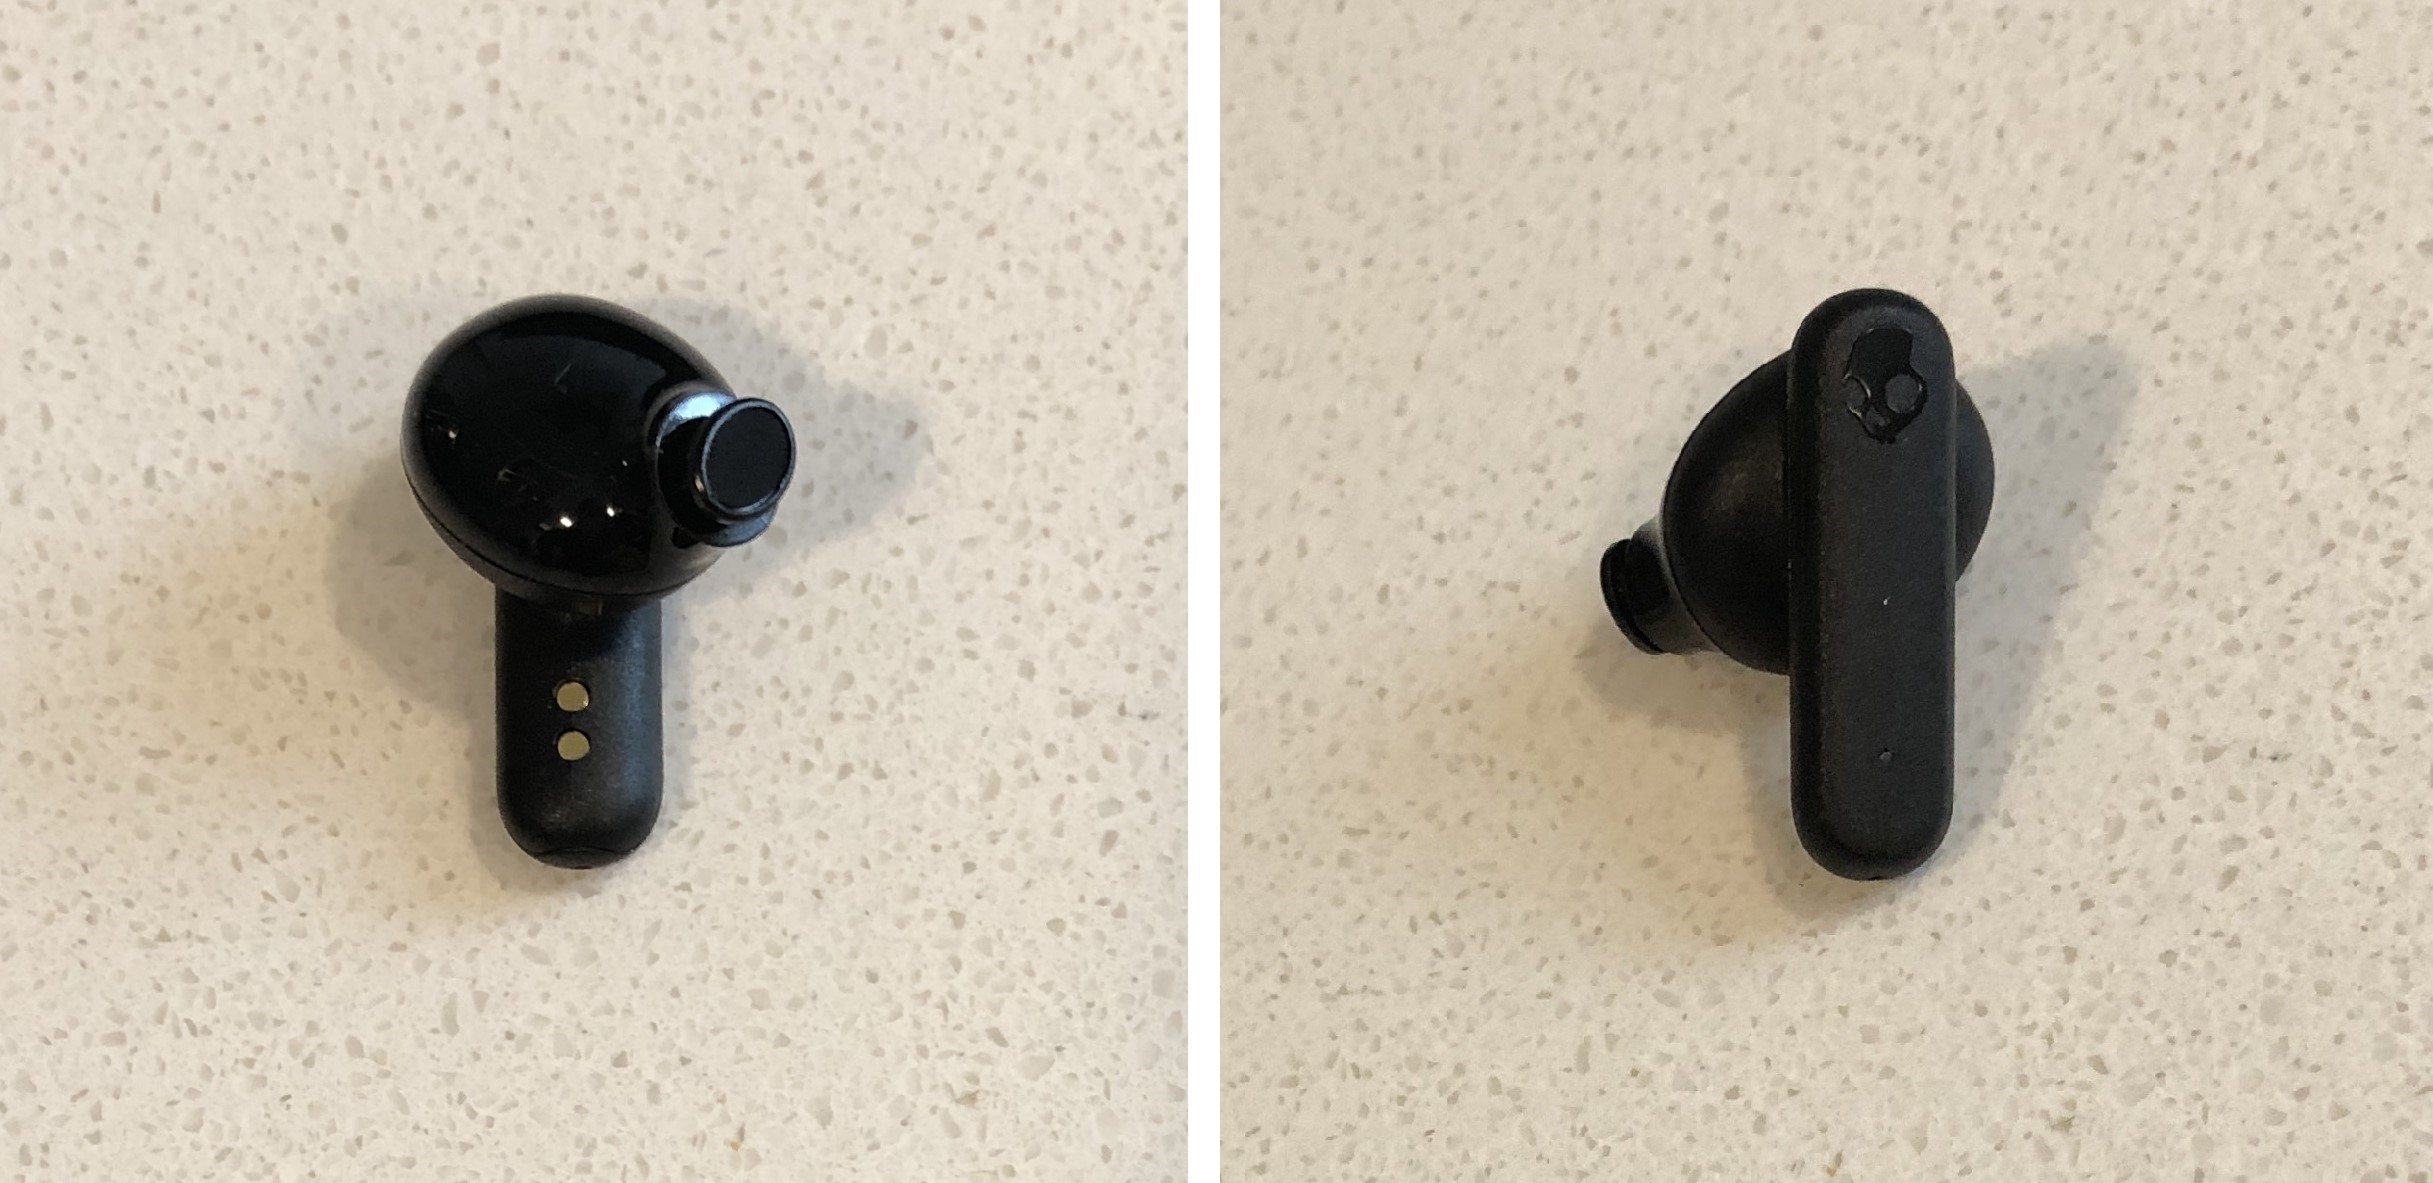 Skullcandy Smokin Buds earbud front and back